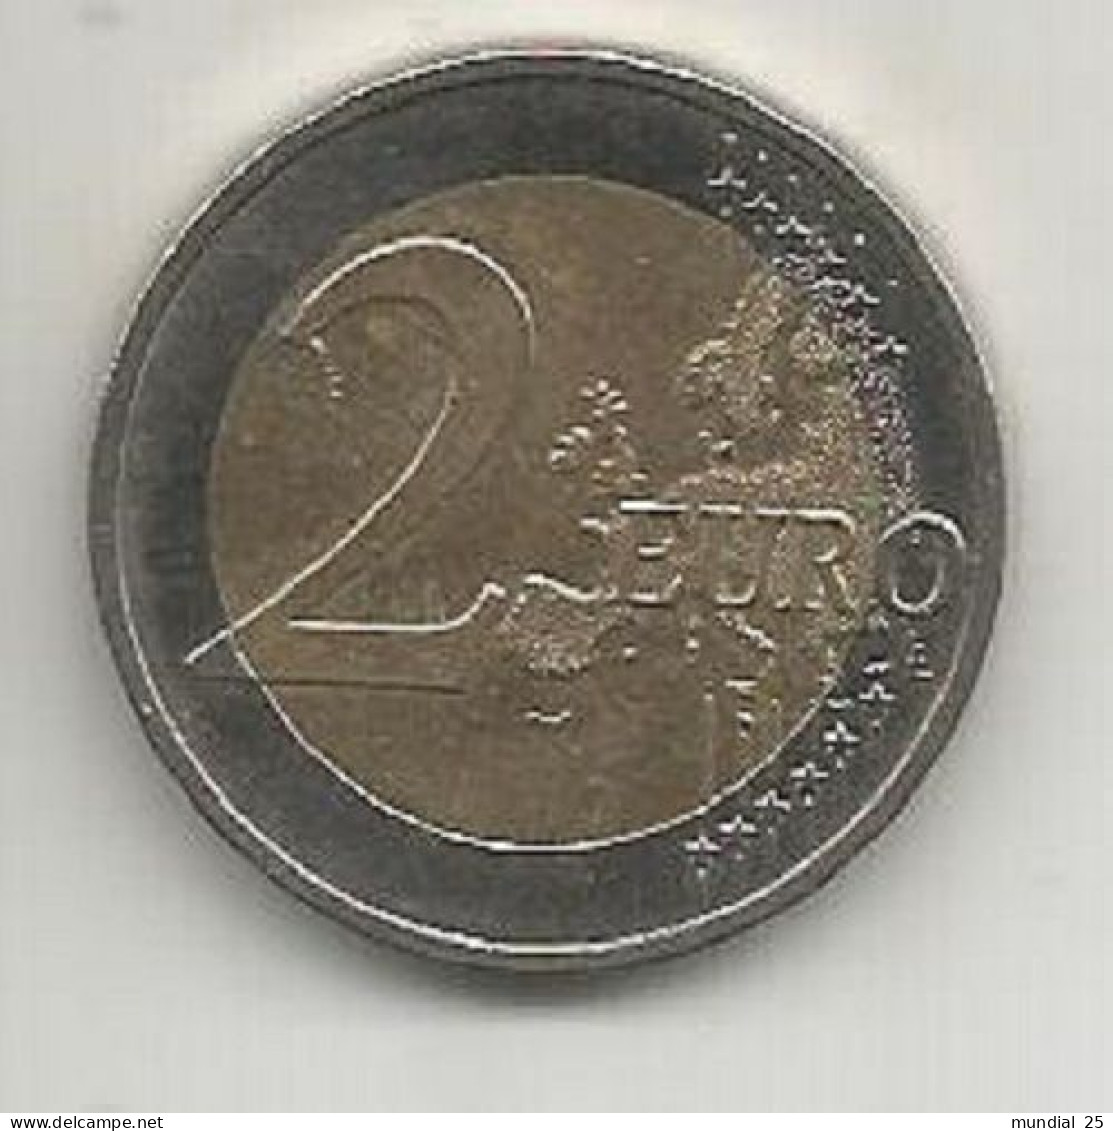 GERMANY 2 EURO 2011 (A) - COLOGNE CATHEDRAL - Allemagne